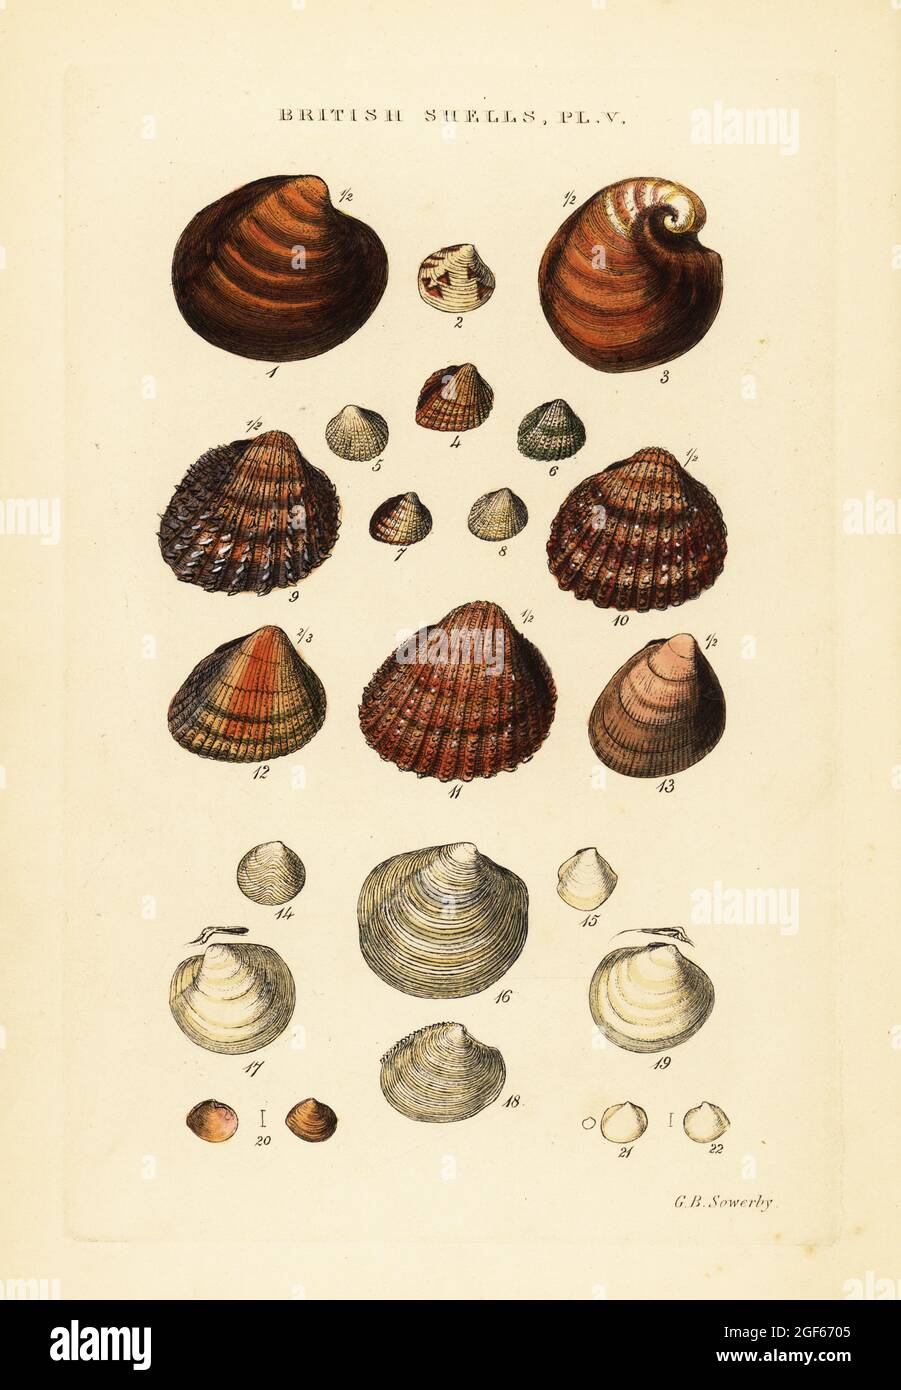 Cockles, Cardium exiguum, Circe minima, Lucina lactea, Axinus, etc. Handcoloured copperplate engraving by George Brettingham Sowerby from his own Illustrated Index of British Shells, Sowerby and Simpkin, Marshall & Co., London, 1859. George Brettingham Sowerby II (1812-1884), British naturalist, illustrator, and conchologist. Stock Photo